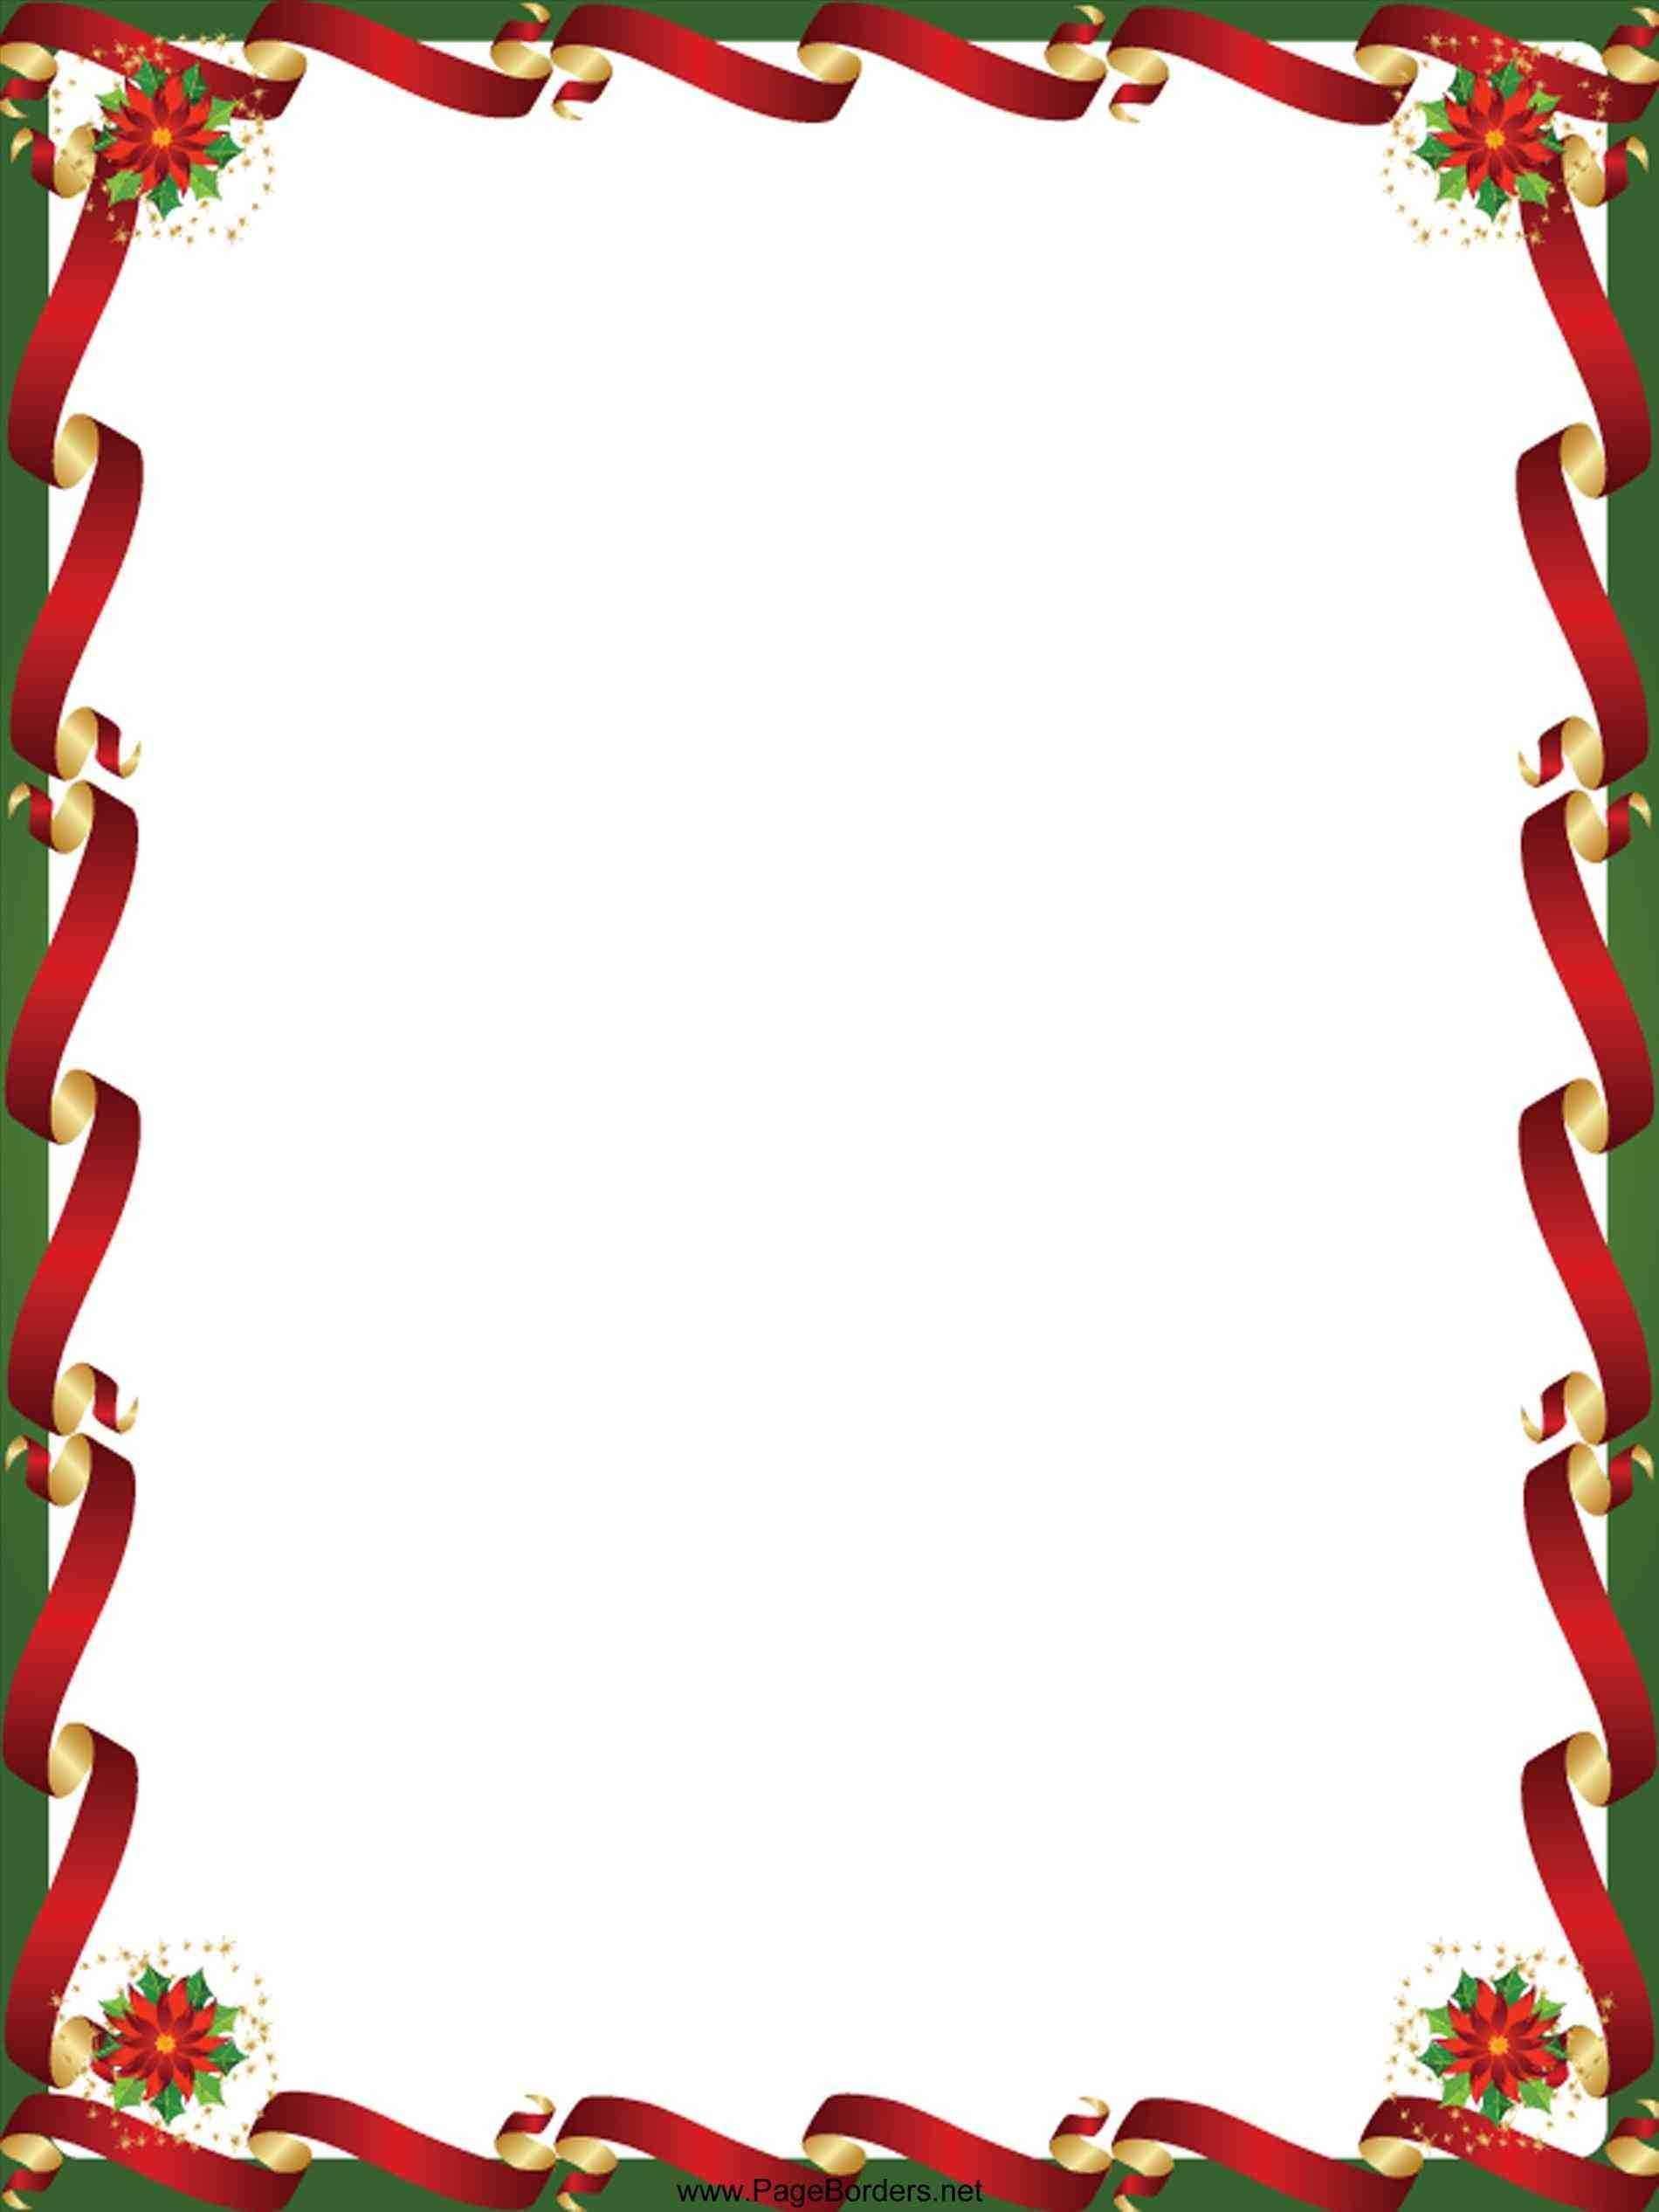 Border Clipart Downloadable Free Christmas Border Templates Pertaining To Christmas Border Word Template